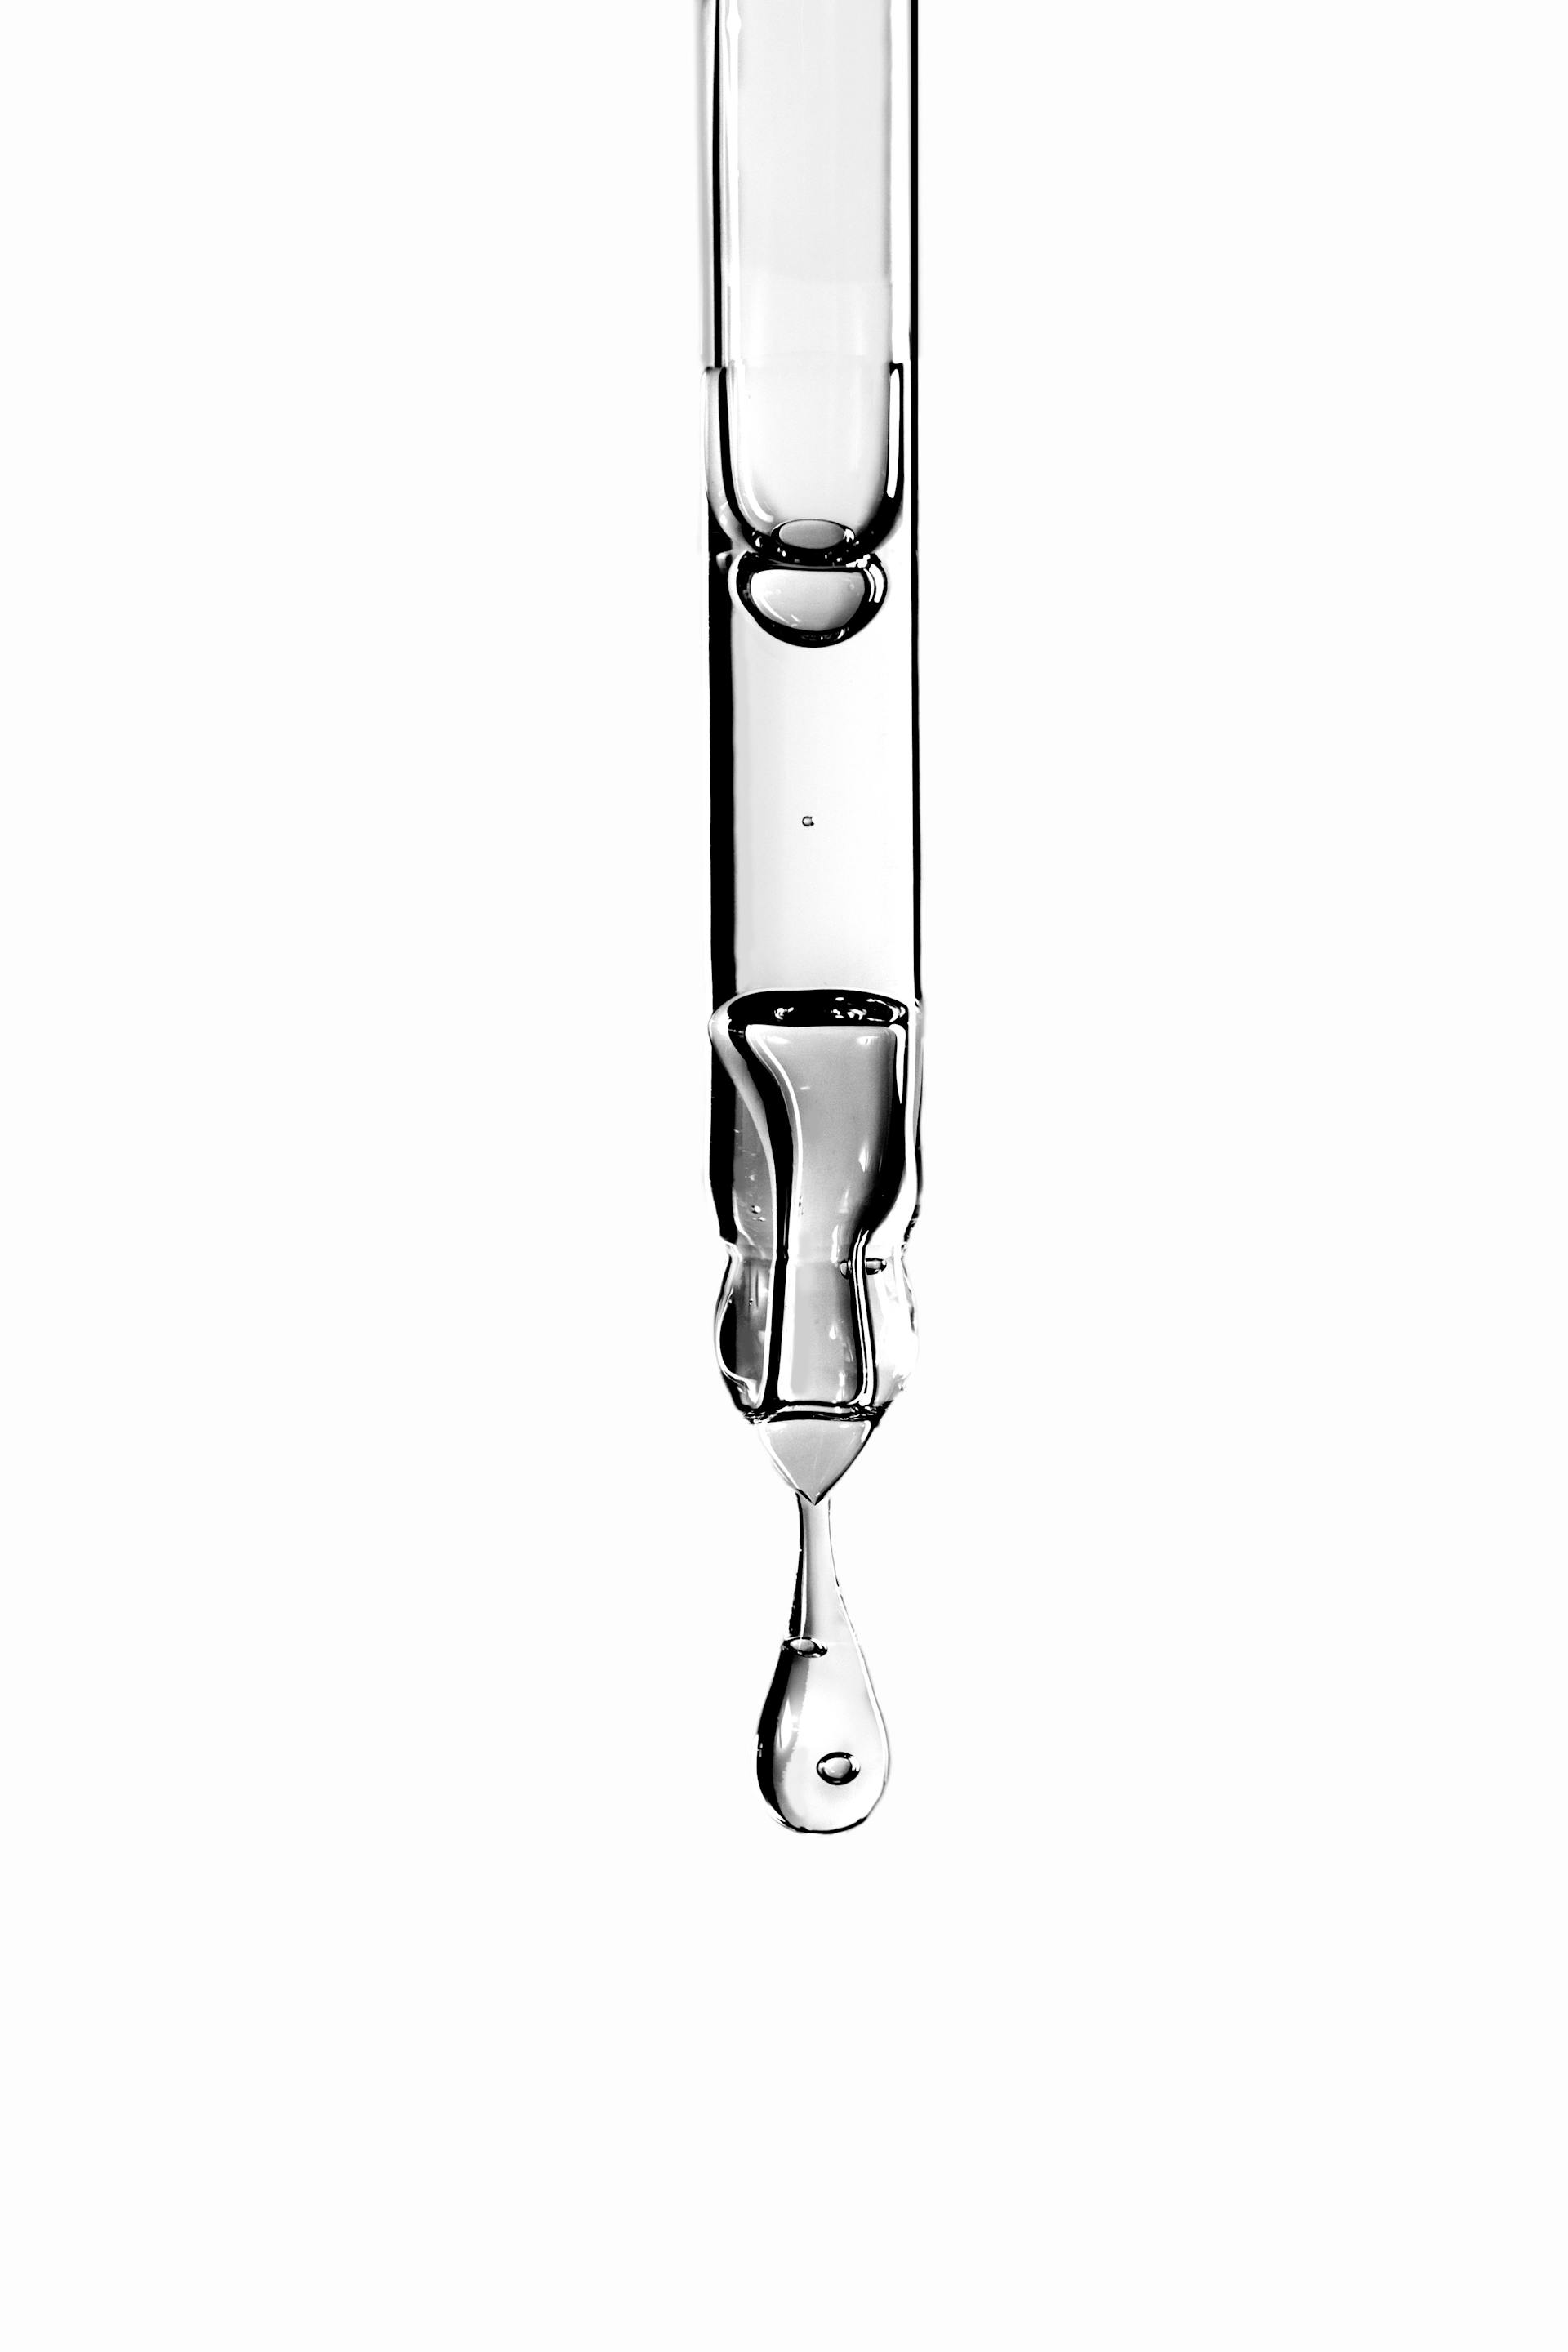 Close up of a glass syringe with one drop of clear liquid emerging from the dropper at the bottom